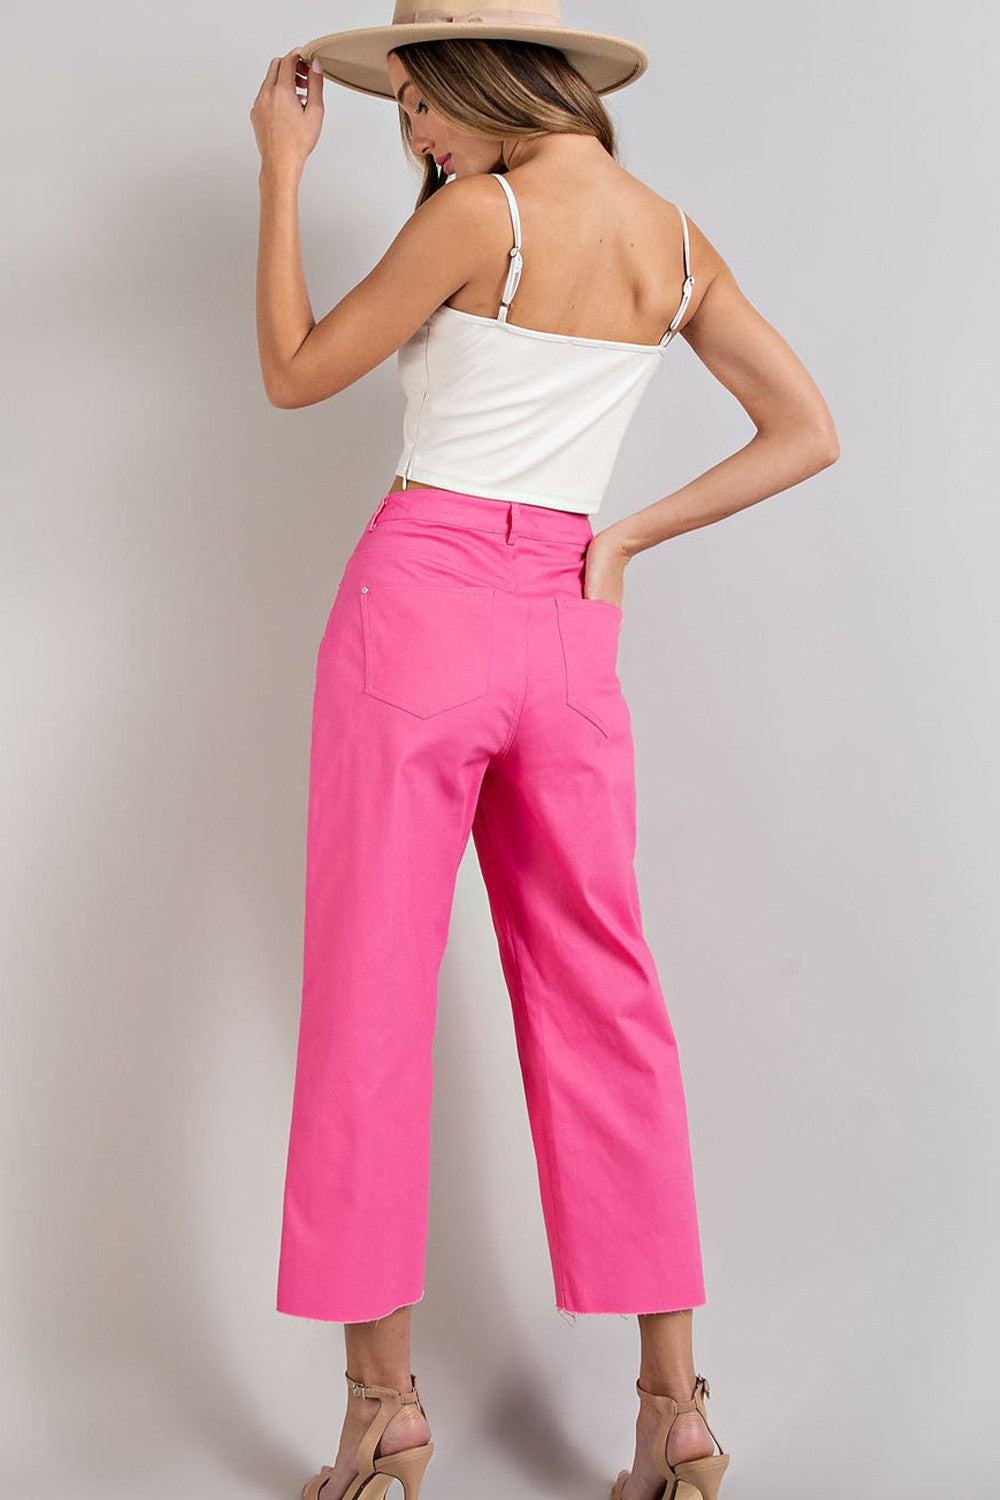 Hot Pink Straight Leg Pants with Pockets